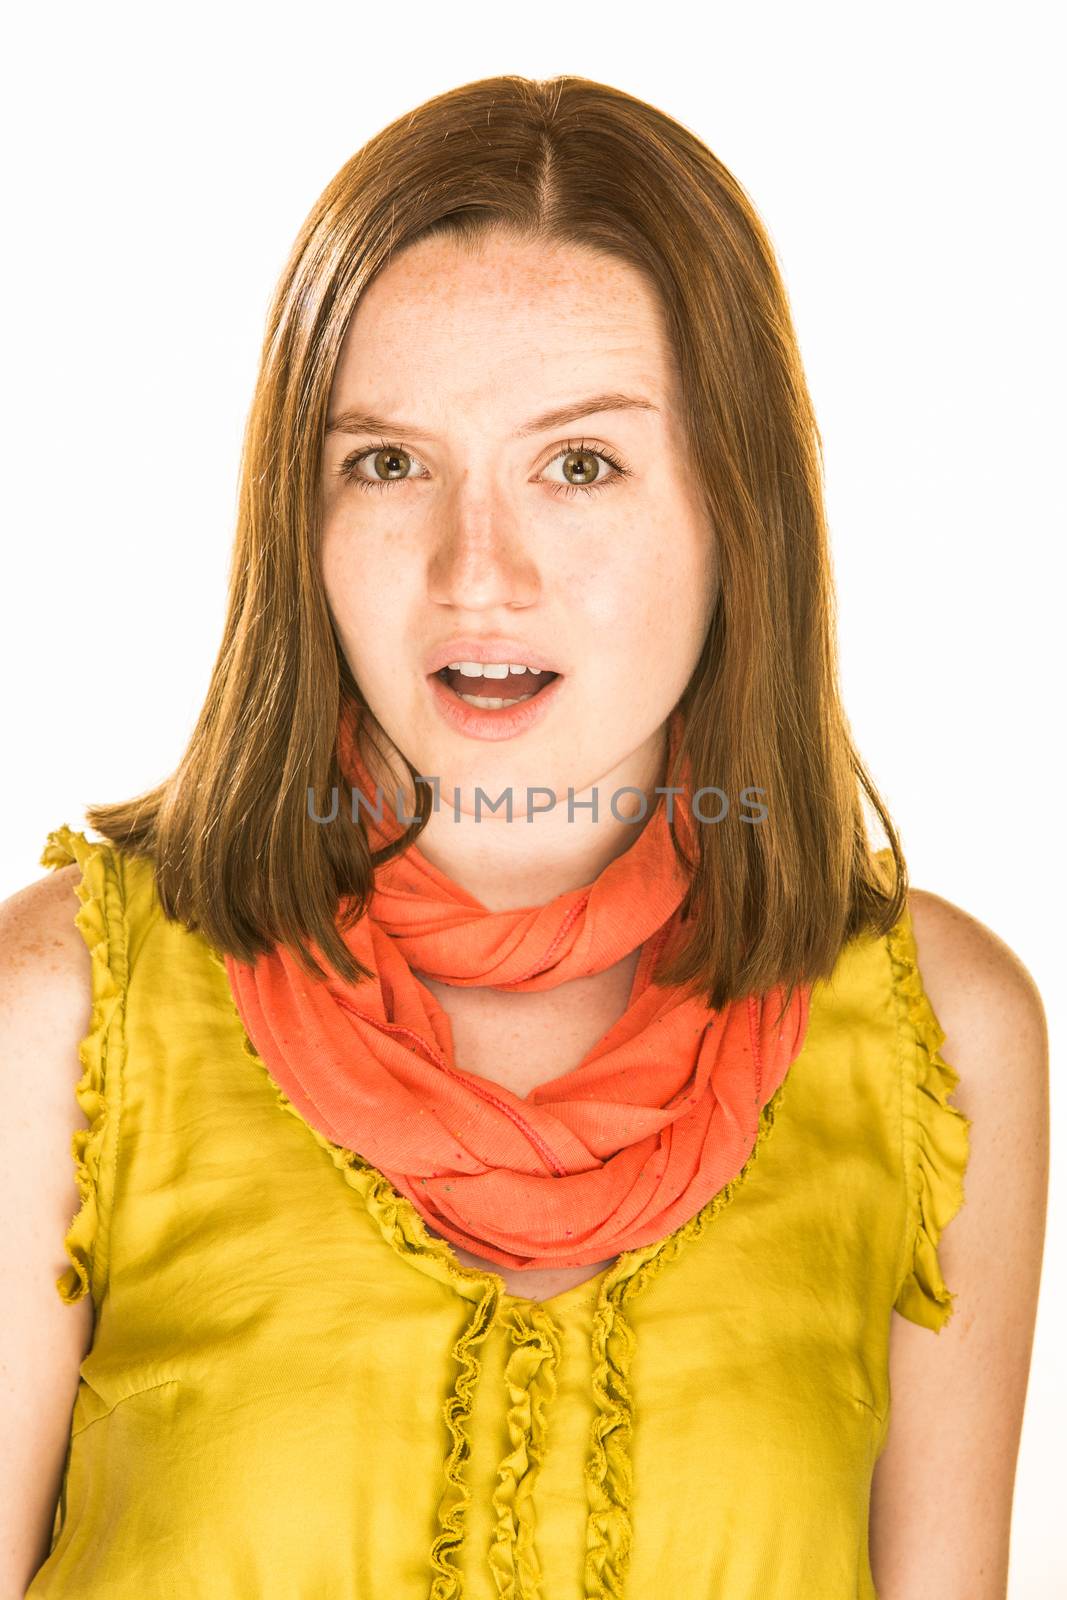 Pretty girl with a confused expression on white background